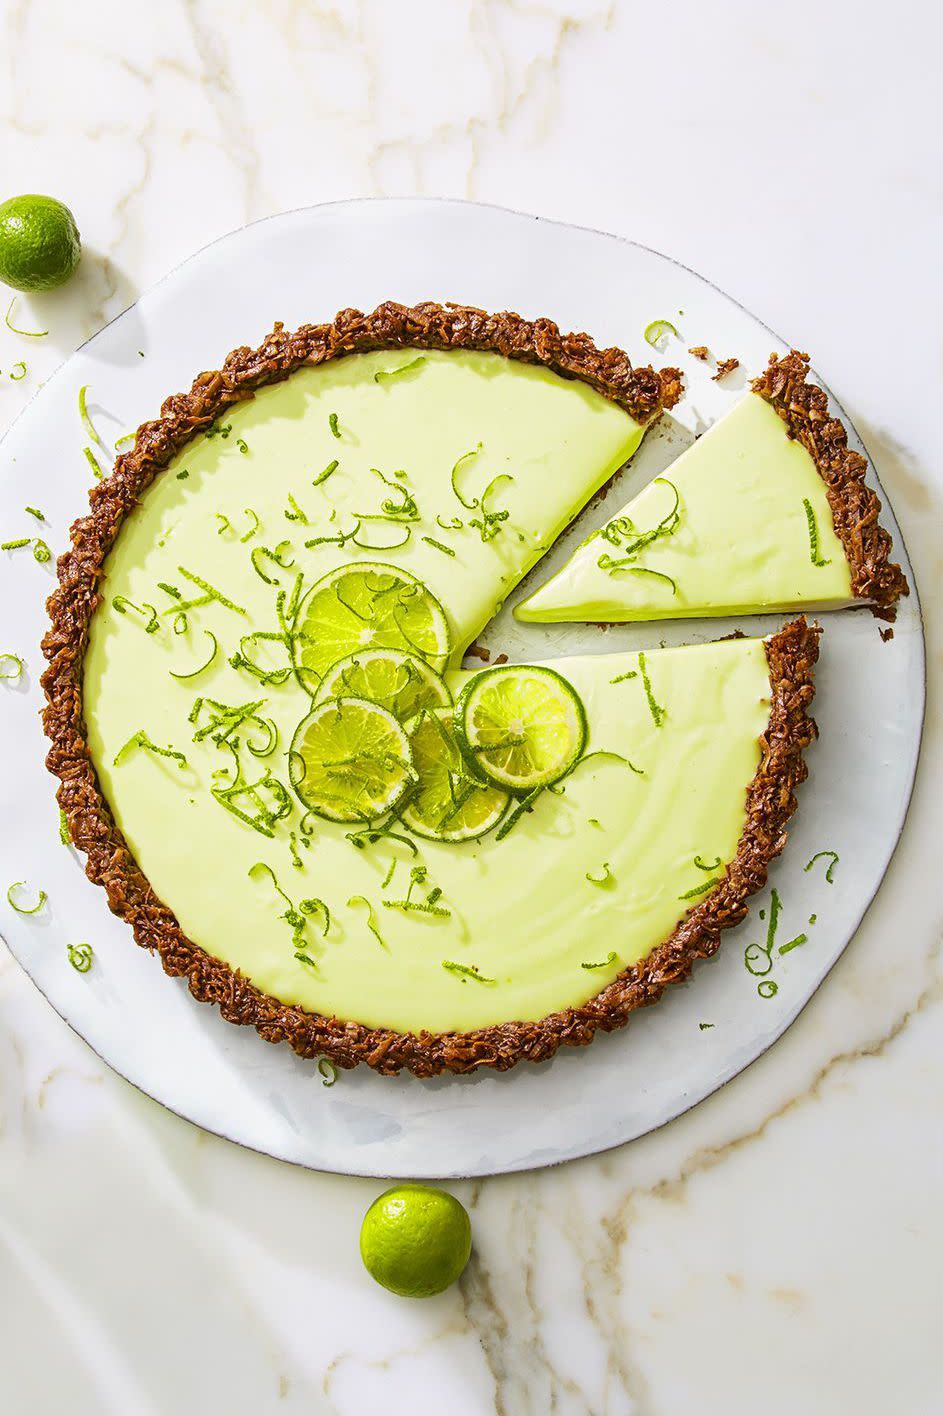 Cocoa-Nutty Lime Tart